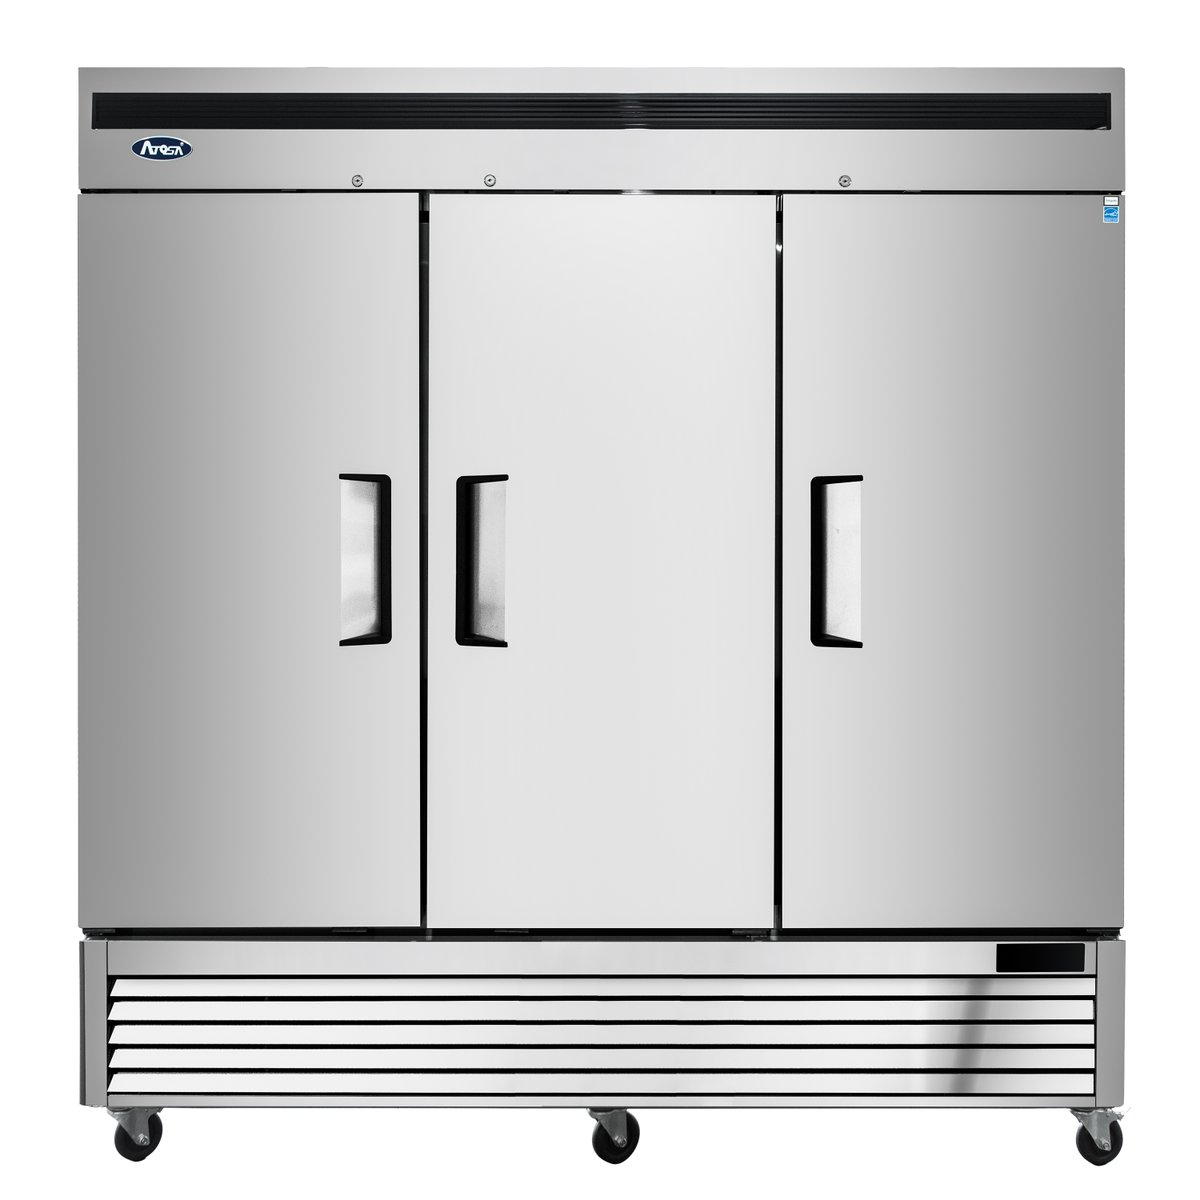 Keep your business cool this #summer with the Atosa Freezer 🌬️🧊 Store more and save more with this top-of-the-line freezer that's perfect for any commercial kitchen. ❄️👨‍🍳 #Atosa #Freezer #CommercialKitchen #SaveMore #StoreMore

therestaurantwarehouse.com/collections/fr…